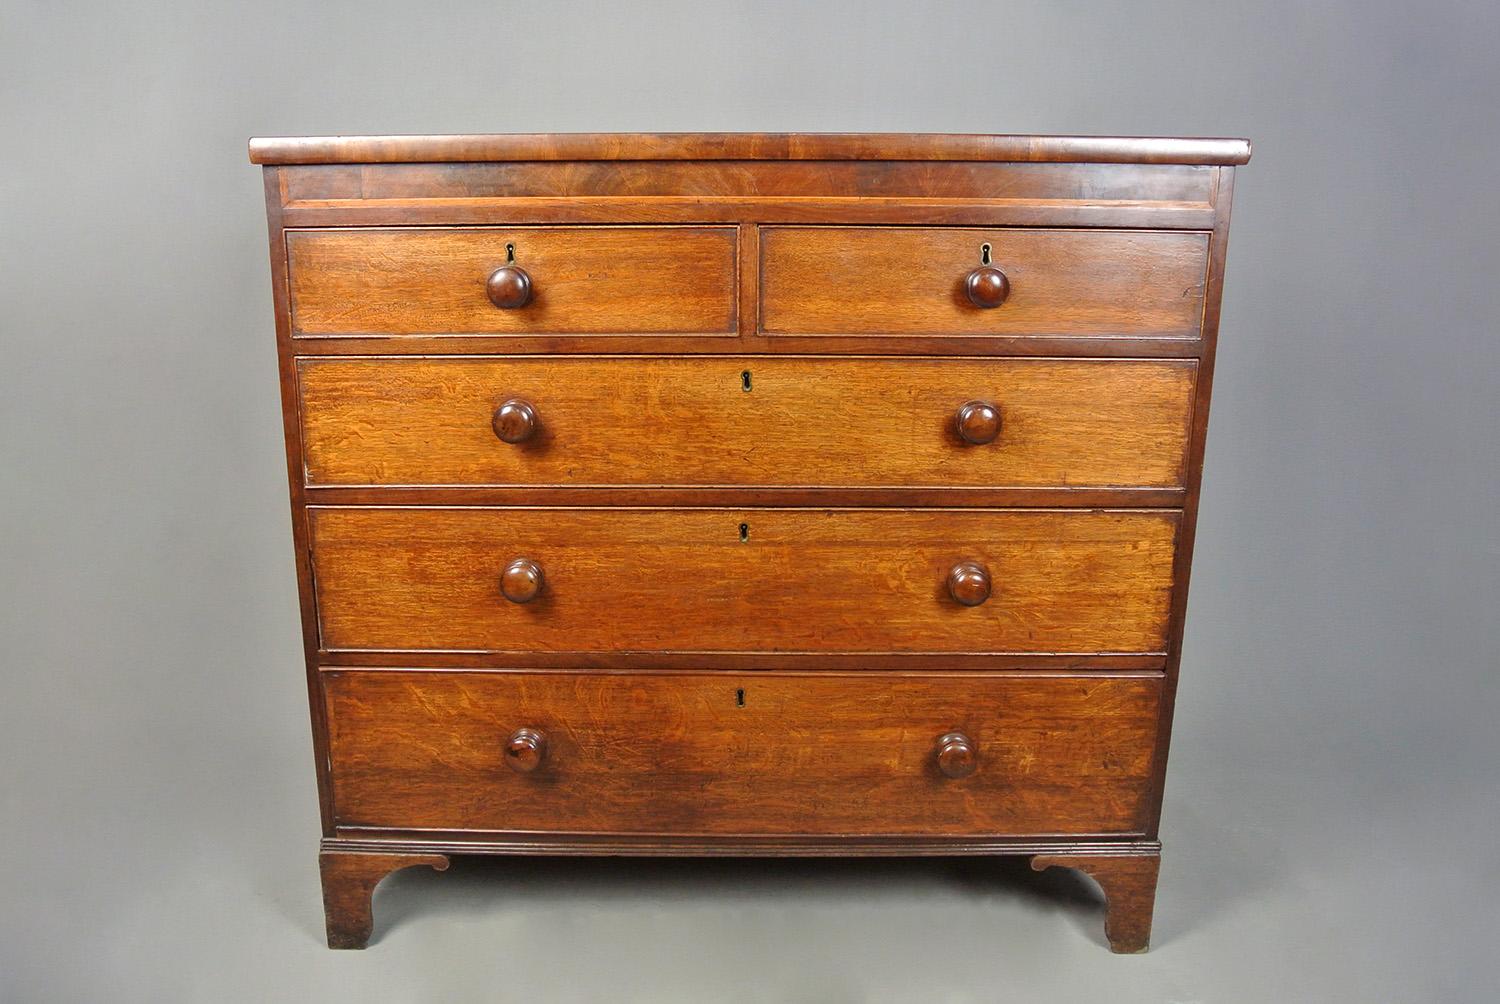 A large, substantial and very usable oak chest of drawers made by hand in c. 1840 and retaining its original well turned knob handle.  The attractive deep frieze is crossbanded with walnut and inlaid with  satinwood banding.  The oversailing top has